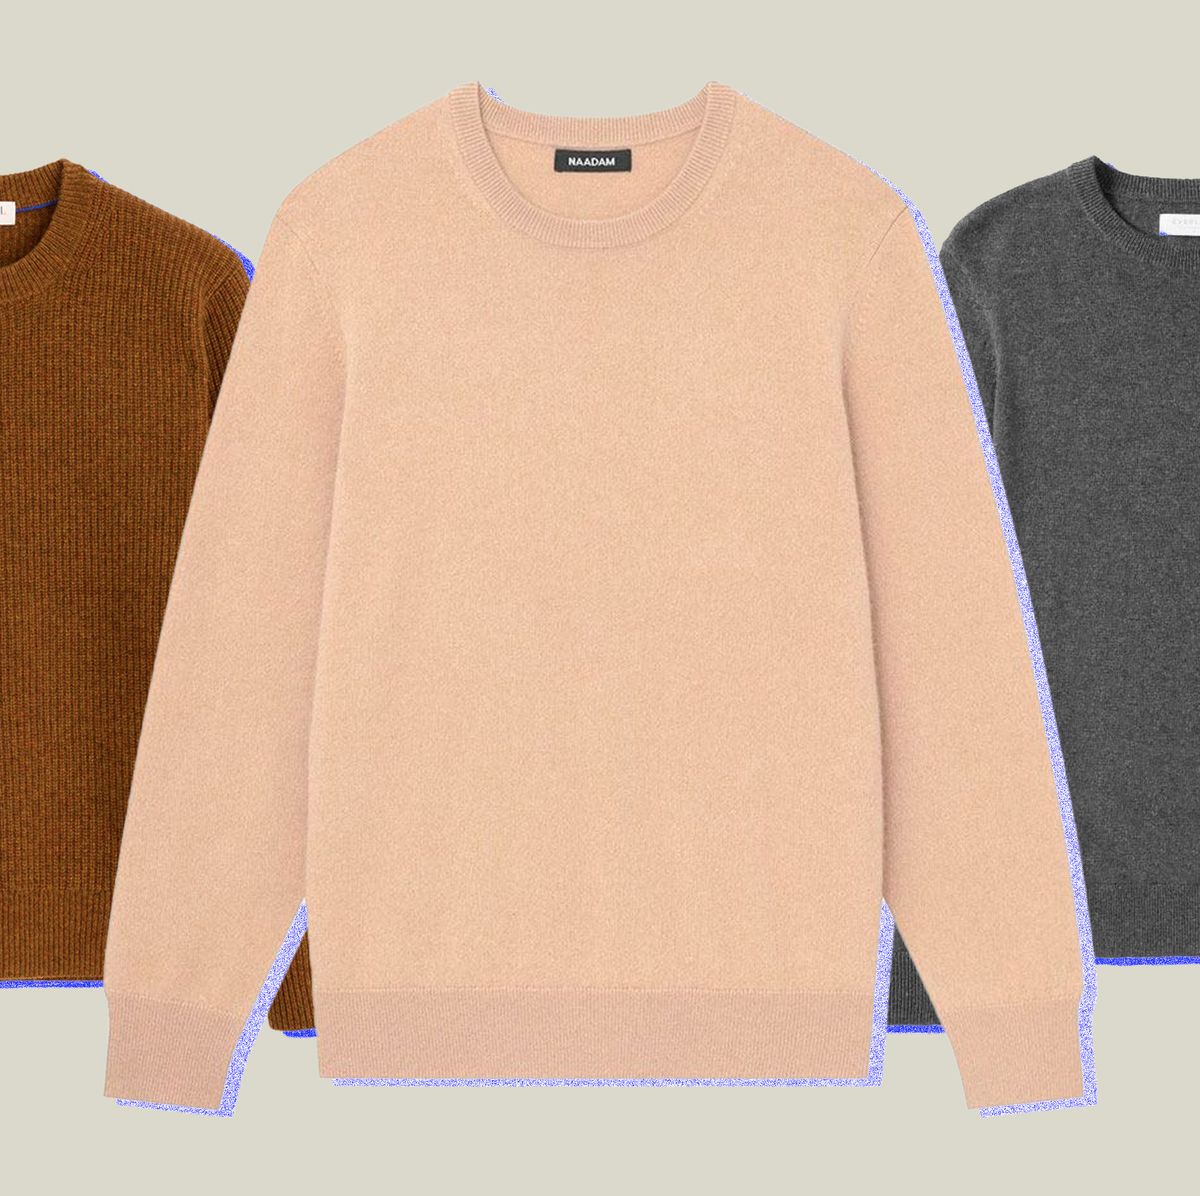 10 Excellent Ways to Wear Your Favorite Cashmere Sweater